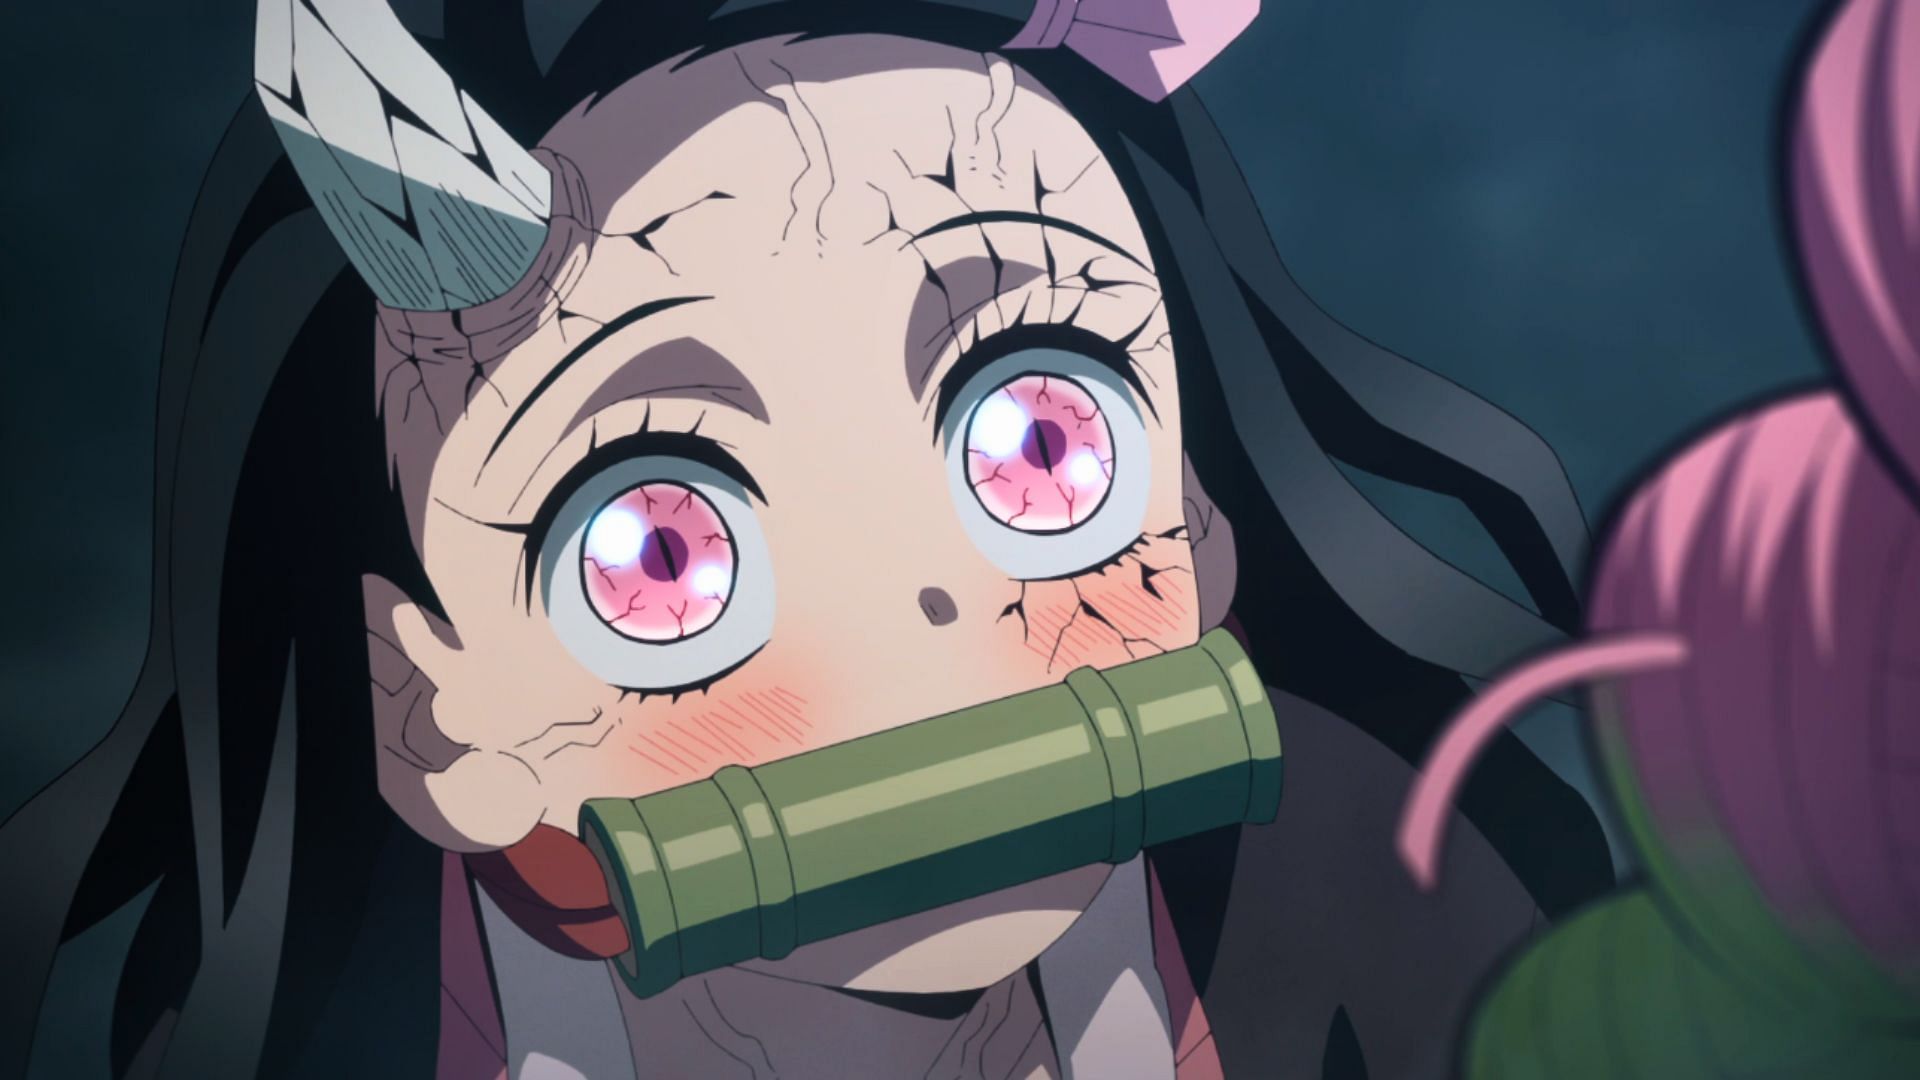 What to expect from Demon Slayer Season 3 Episode 10?